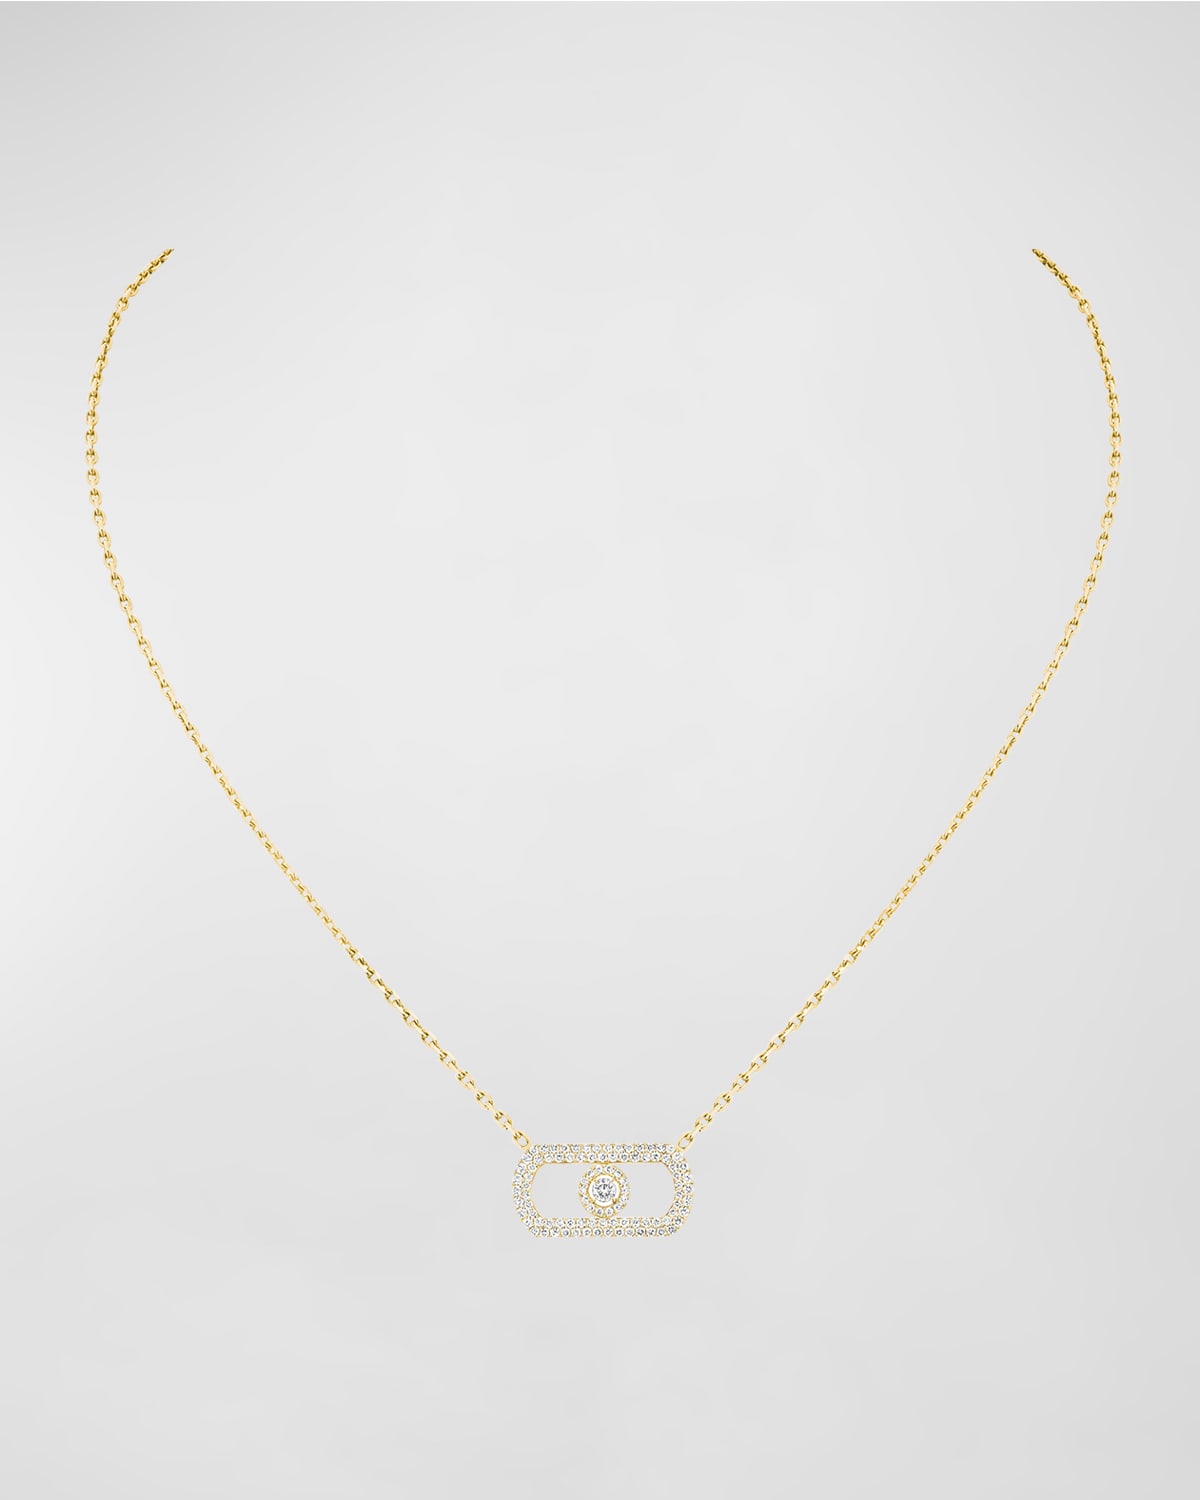 MESSIKA SO MOVE 18K YELLOW GOLD DIAMOND PAVE PENDANT NECKLACE